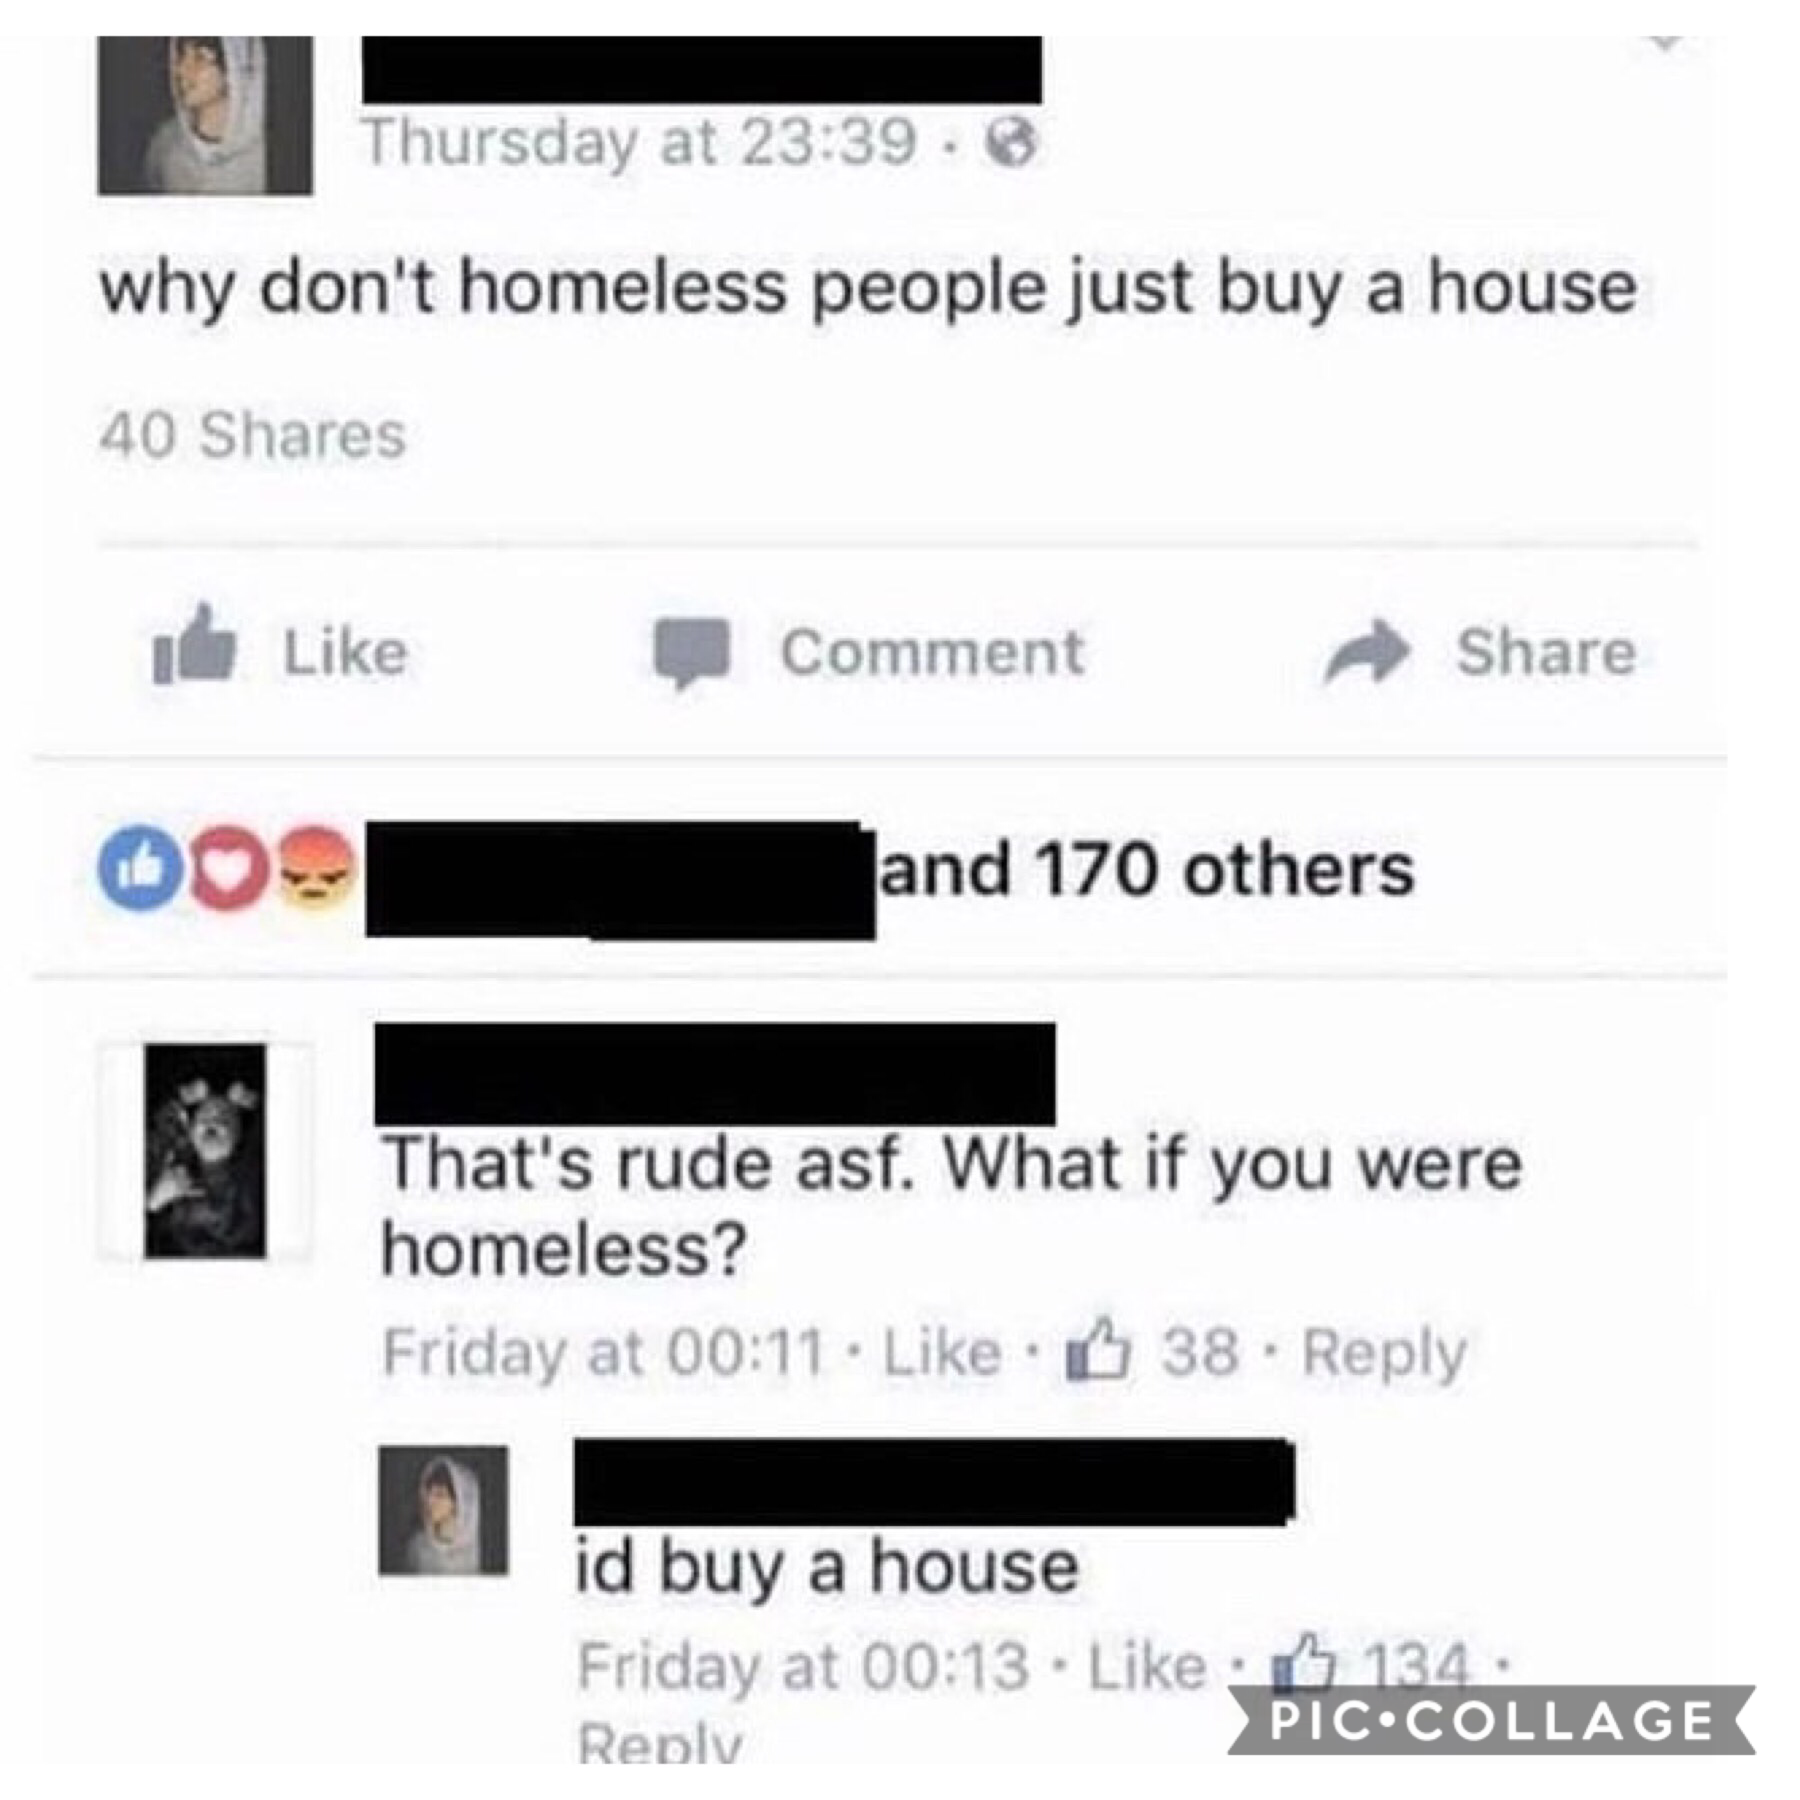 Why don’t homeless people buy a house?